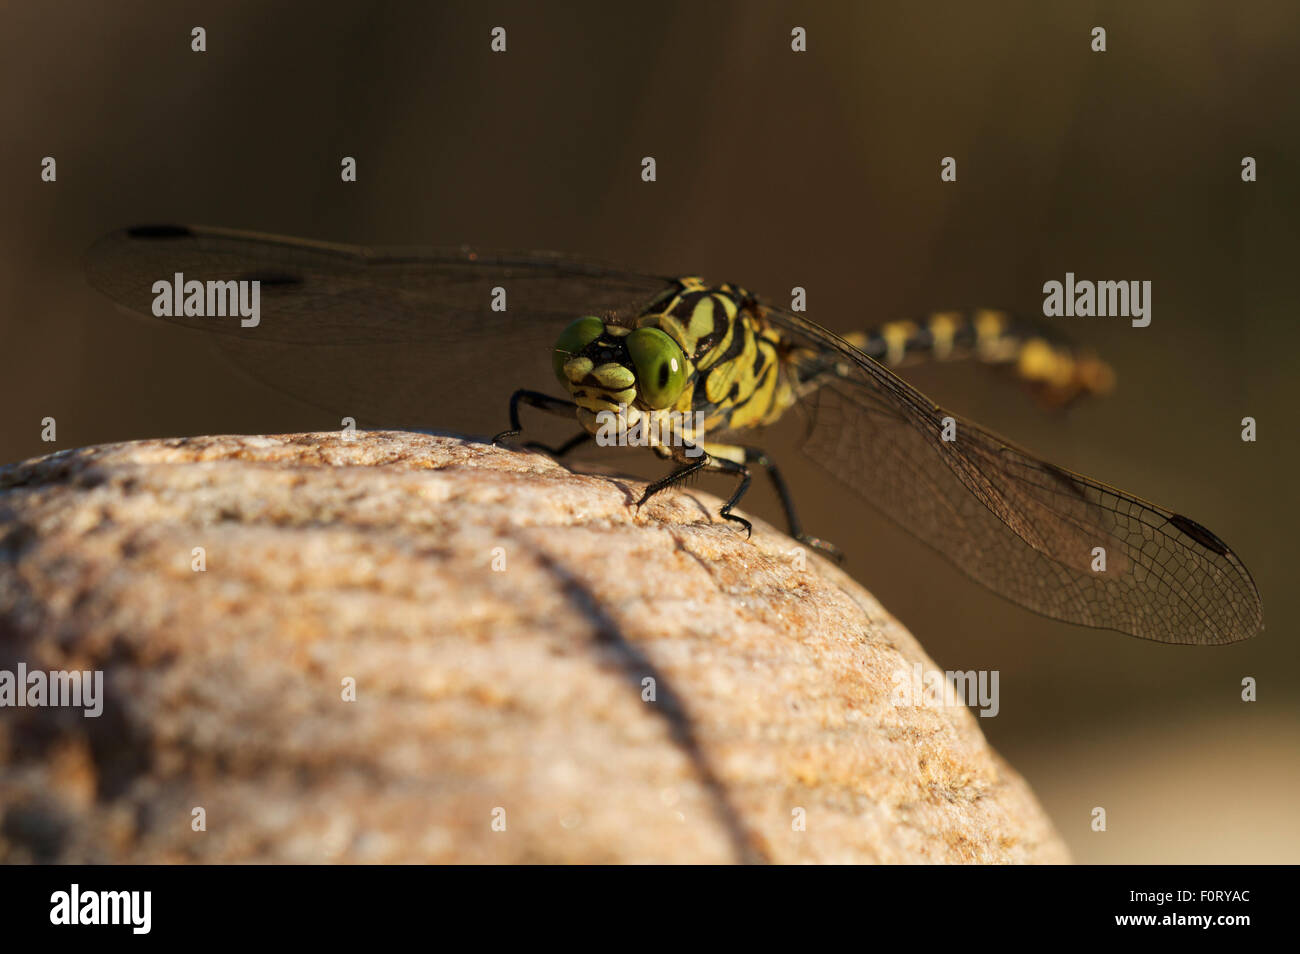 Male Yellow clubtail dragonfly (Gomphus simillimus) resting on stone, Allier river, Pont-du-Chateau, Auvergne, France, August 2010 Stock Photo